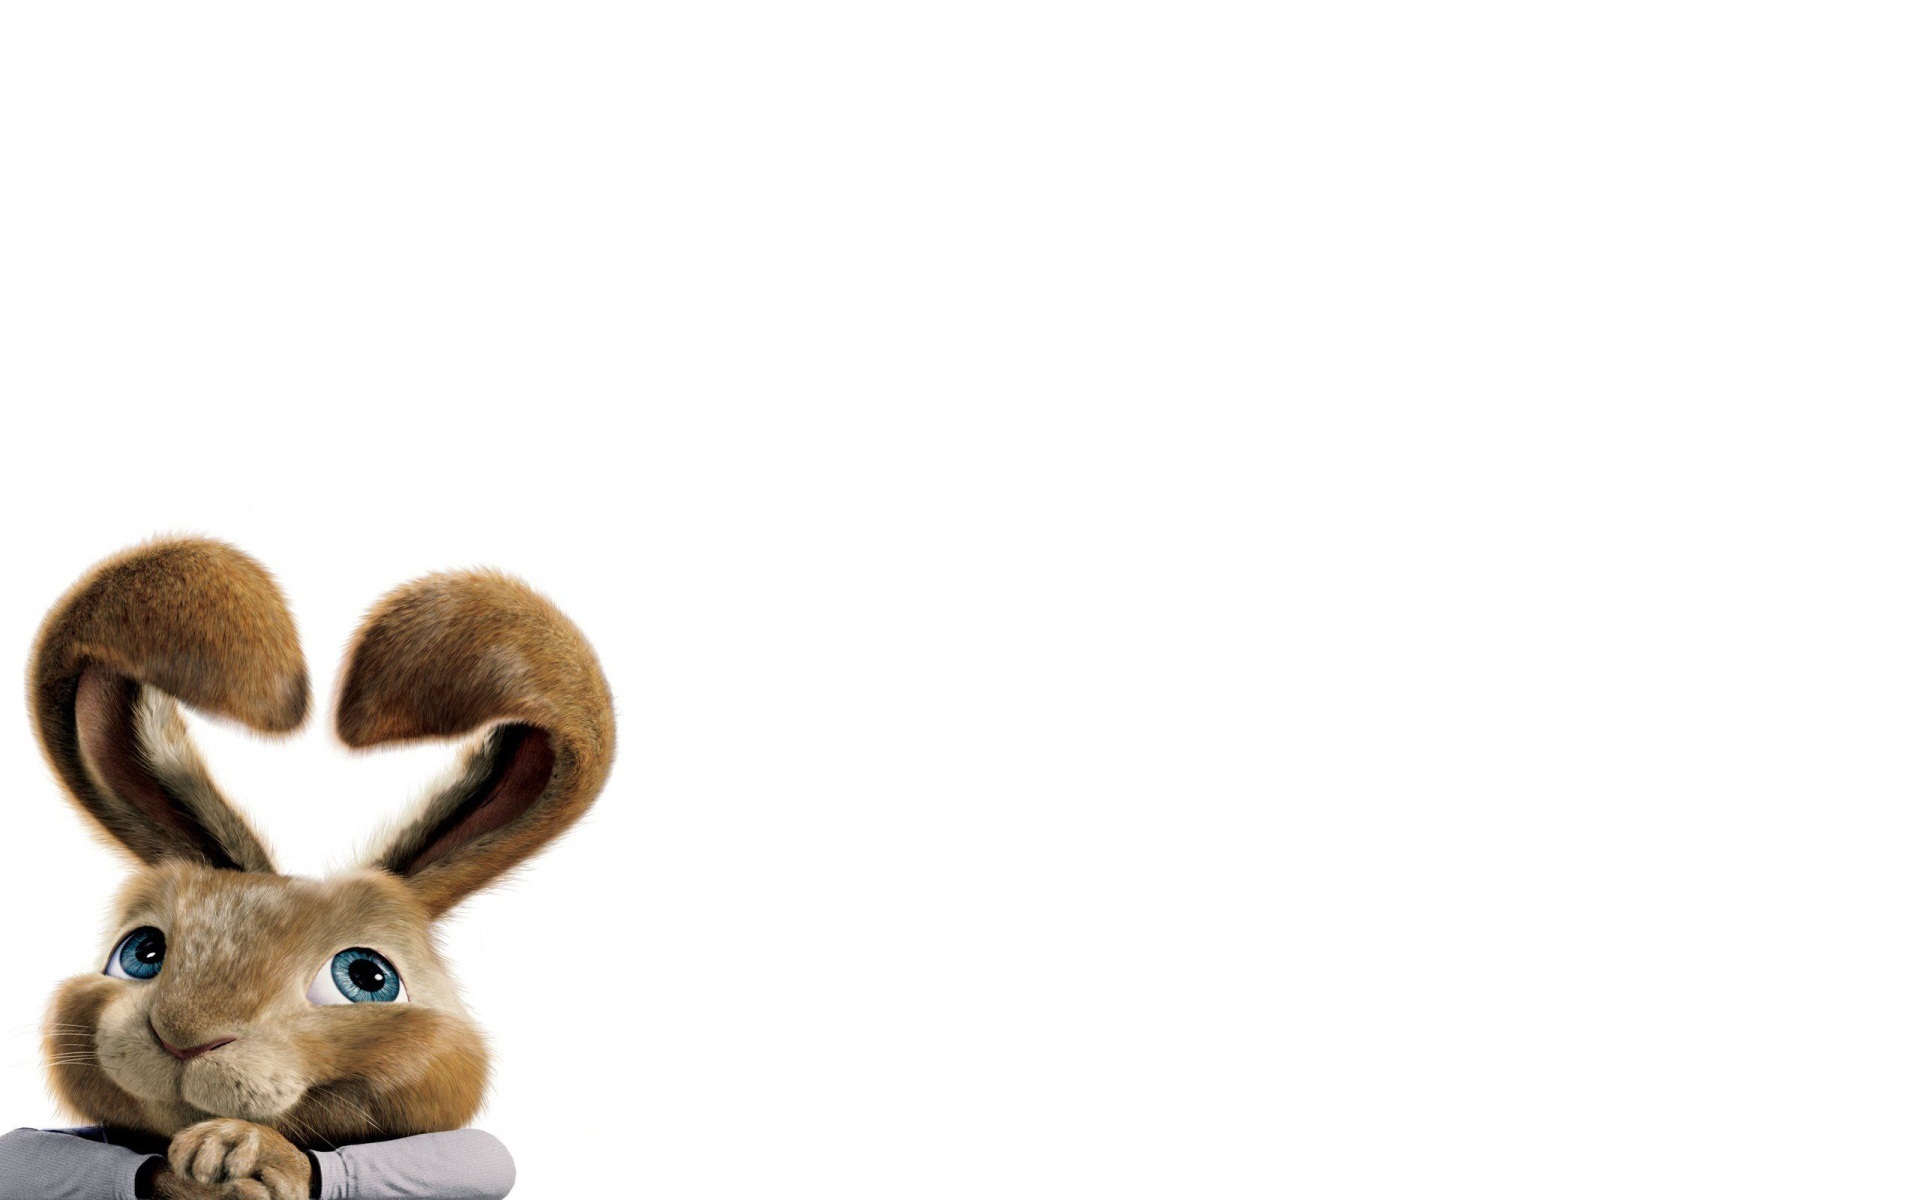 Toy long-eared bunny on white background